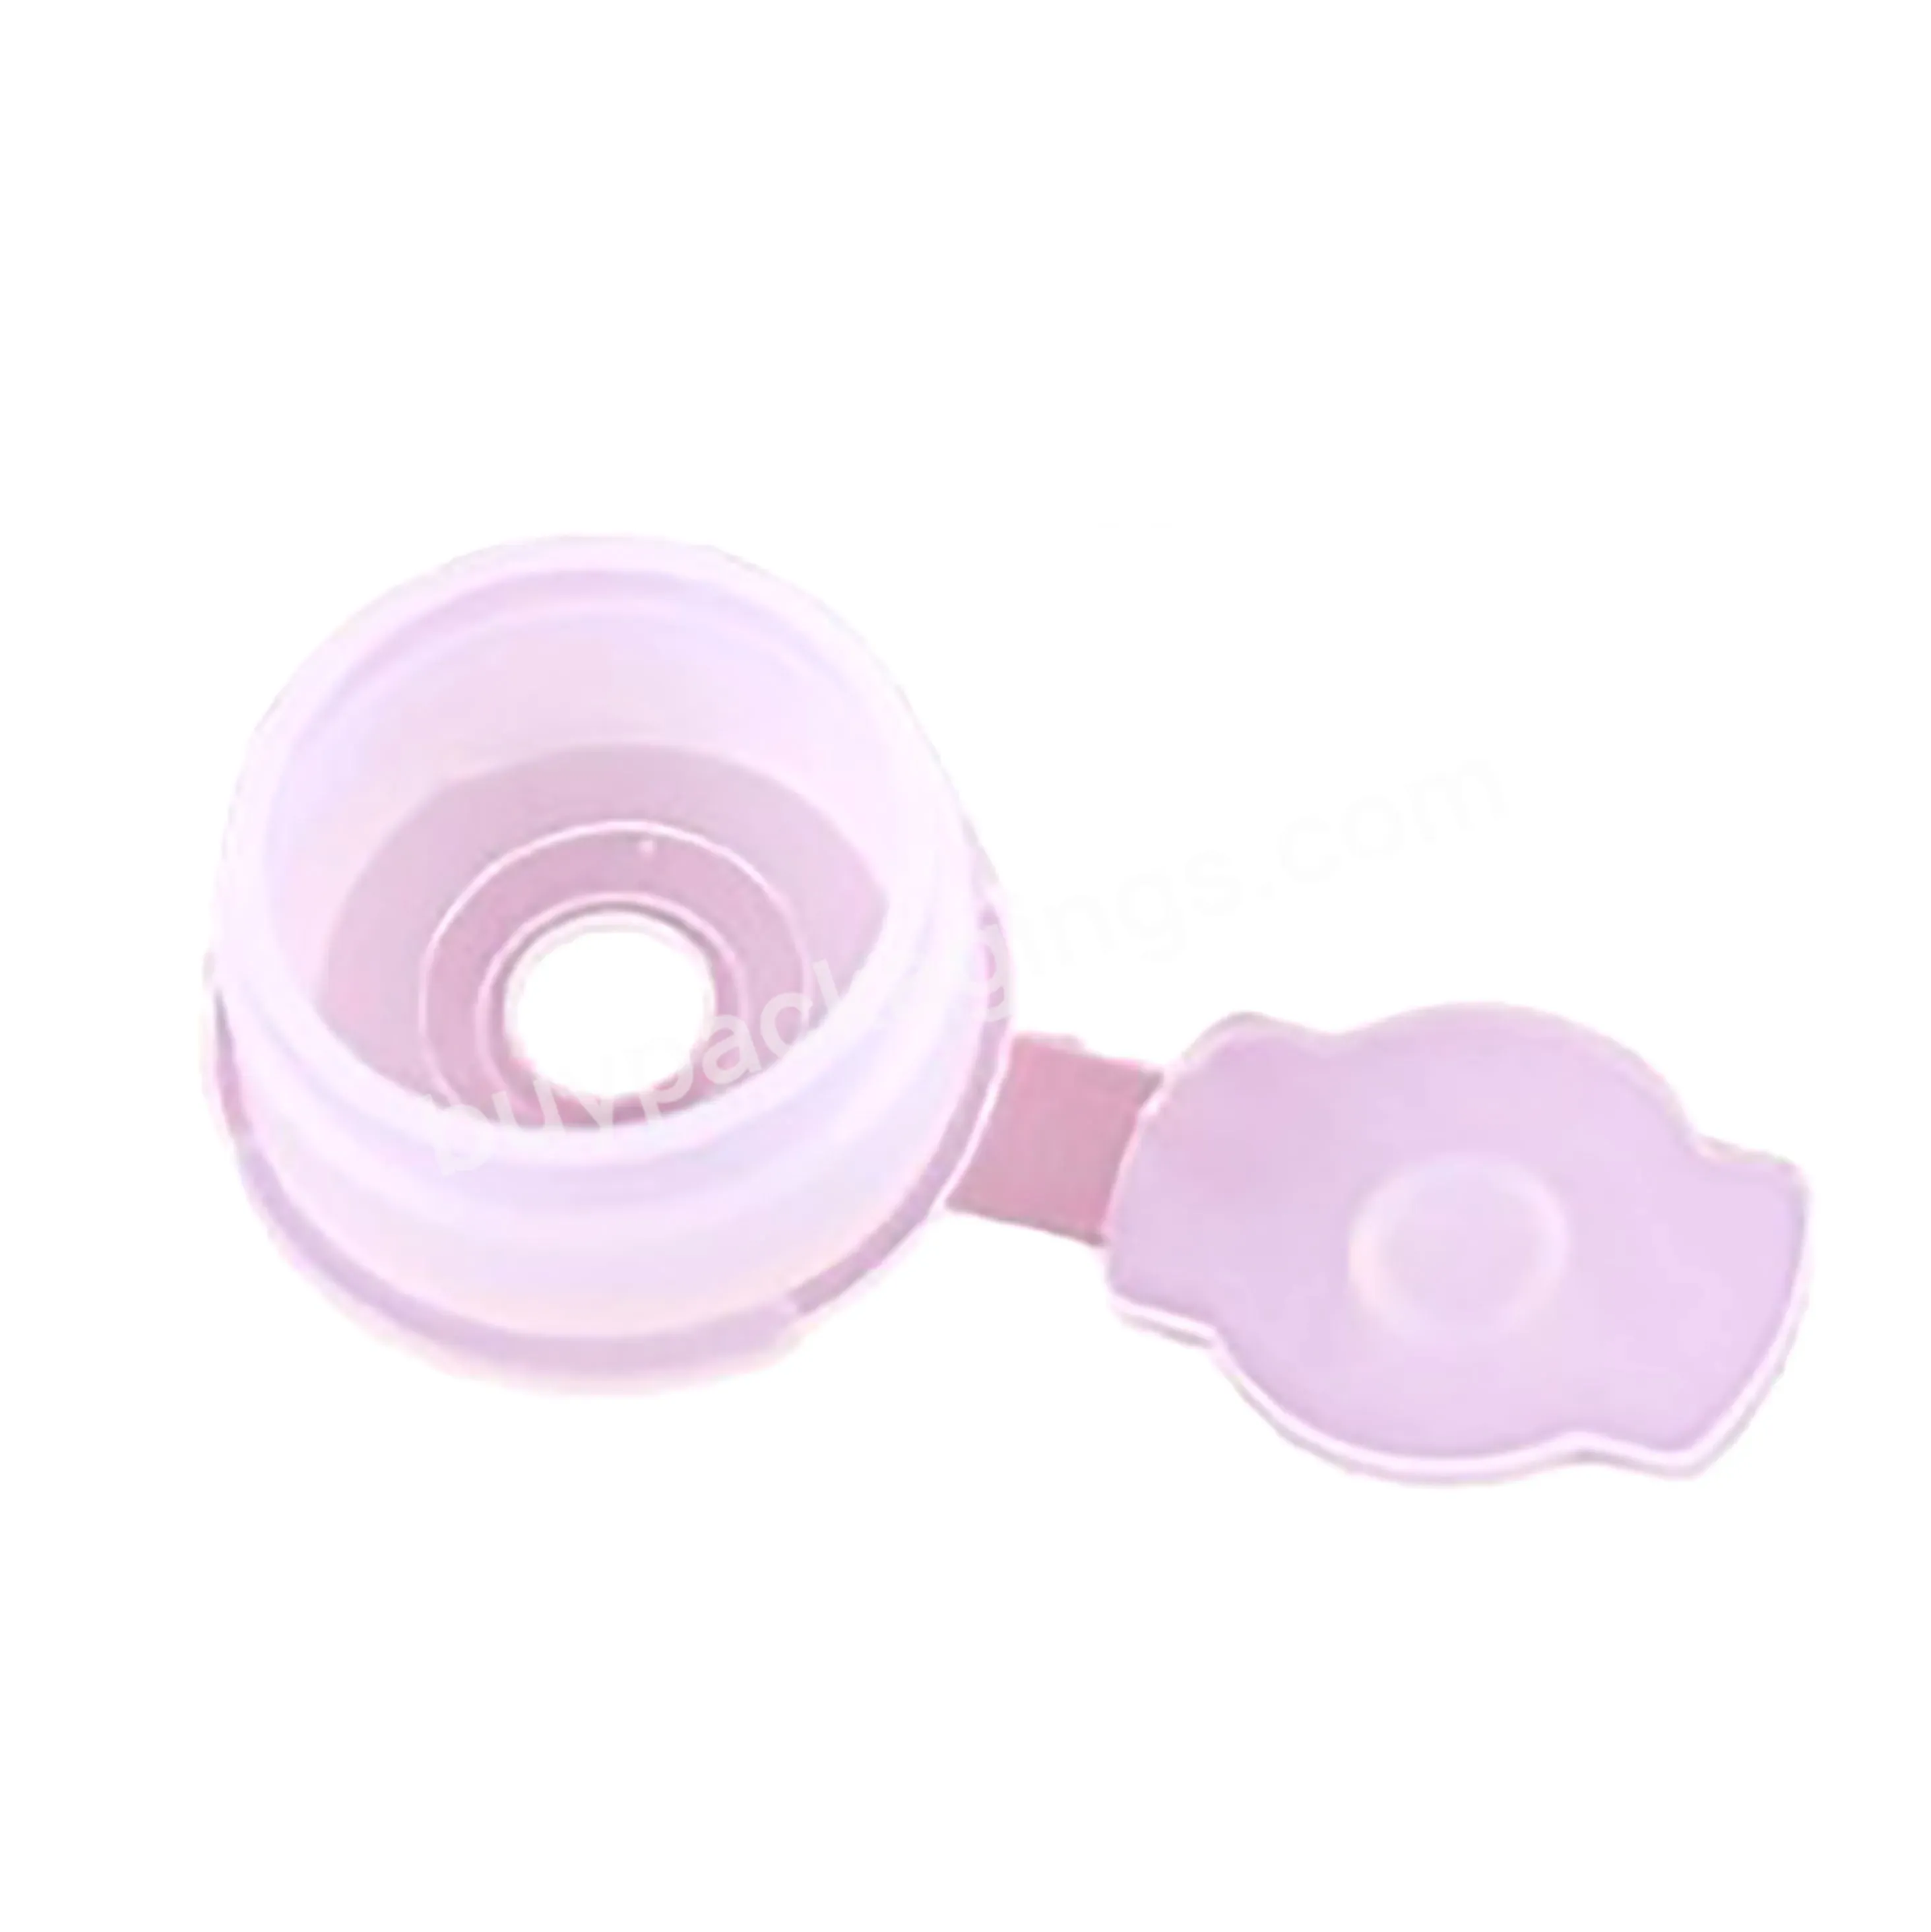 Wholesale 19mm Cosmetic Plastic Inner Plug Dust-proof Conjoined Plug For Essential Oil Bottle Lotion Bottle - Buy Wholesale 19mm Cosmetic Plastic Inner Plug,Dust-proof Conjoined Plug,Plug For Essential Oil Bottle Lotion Bottle.